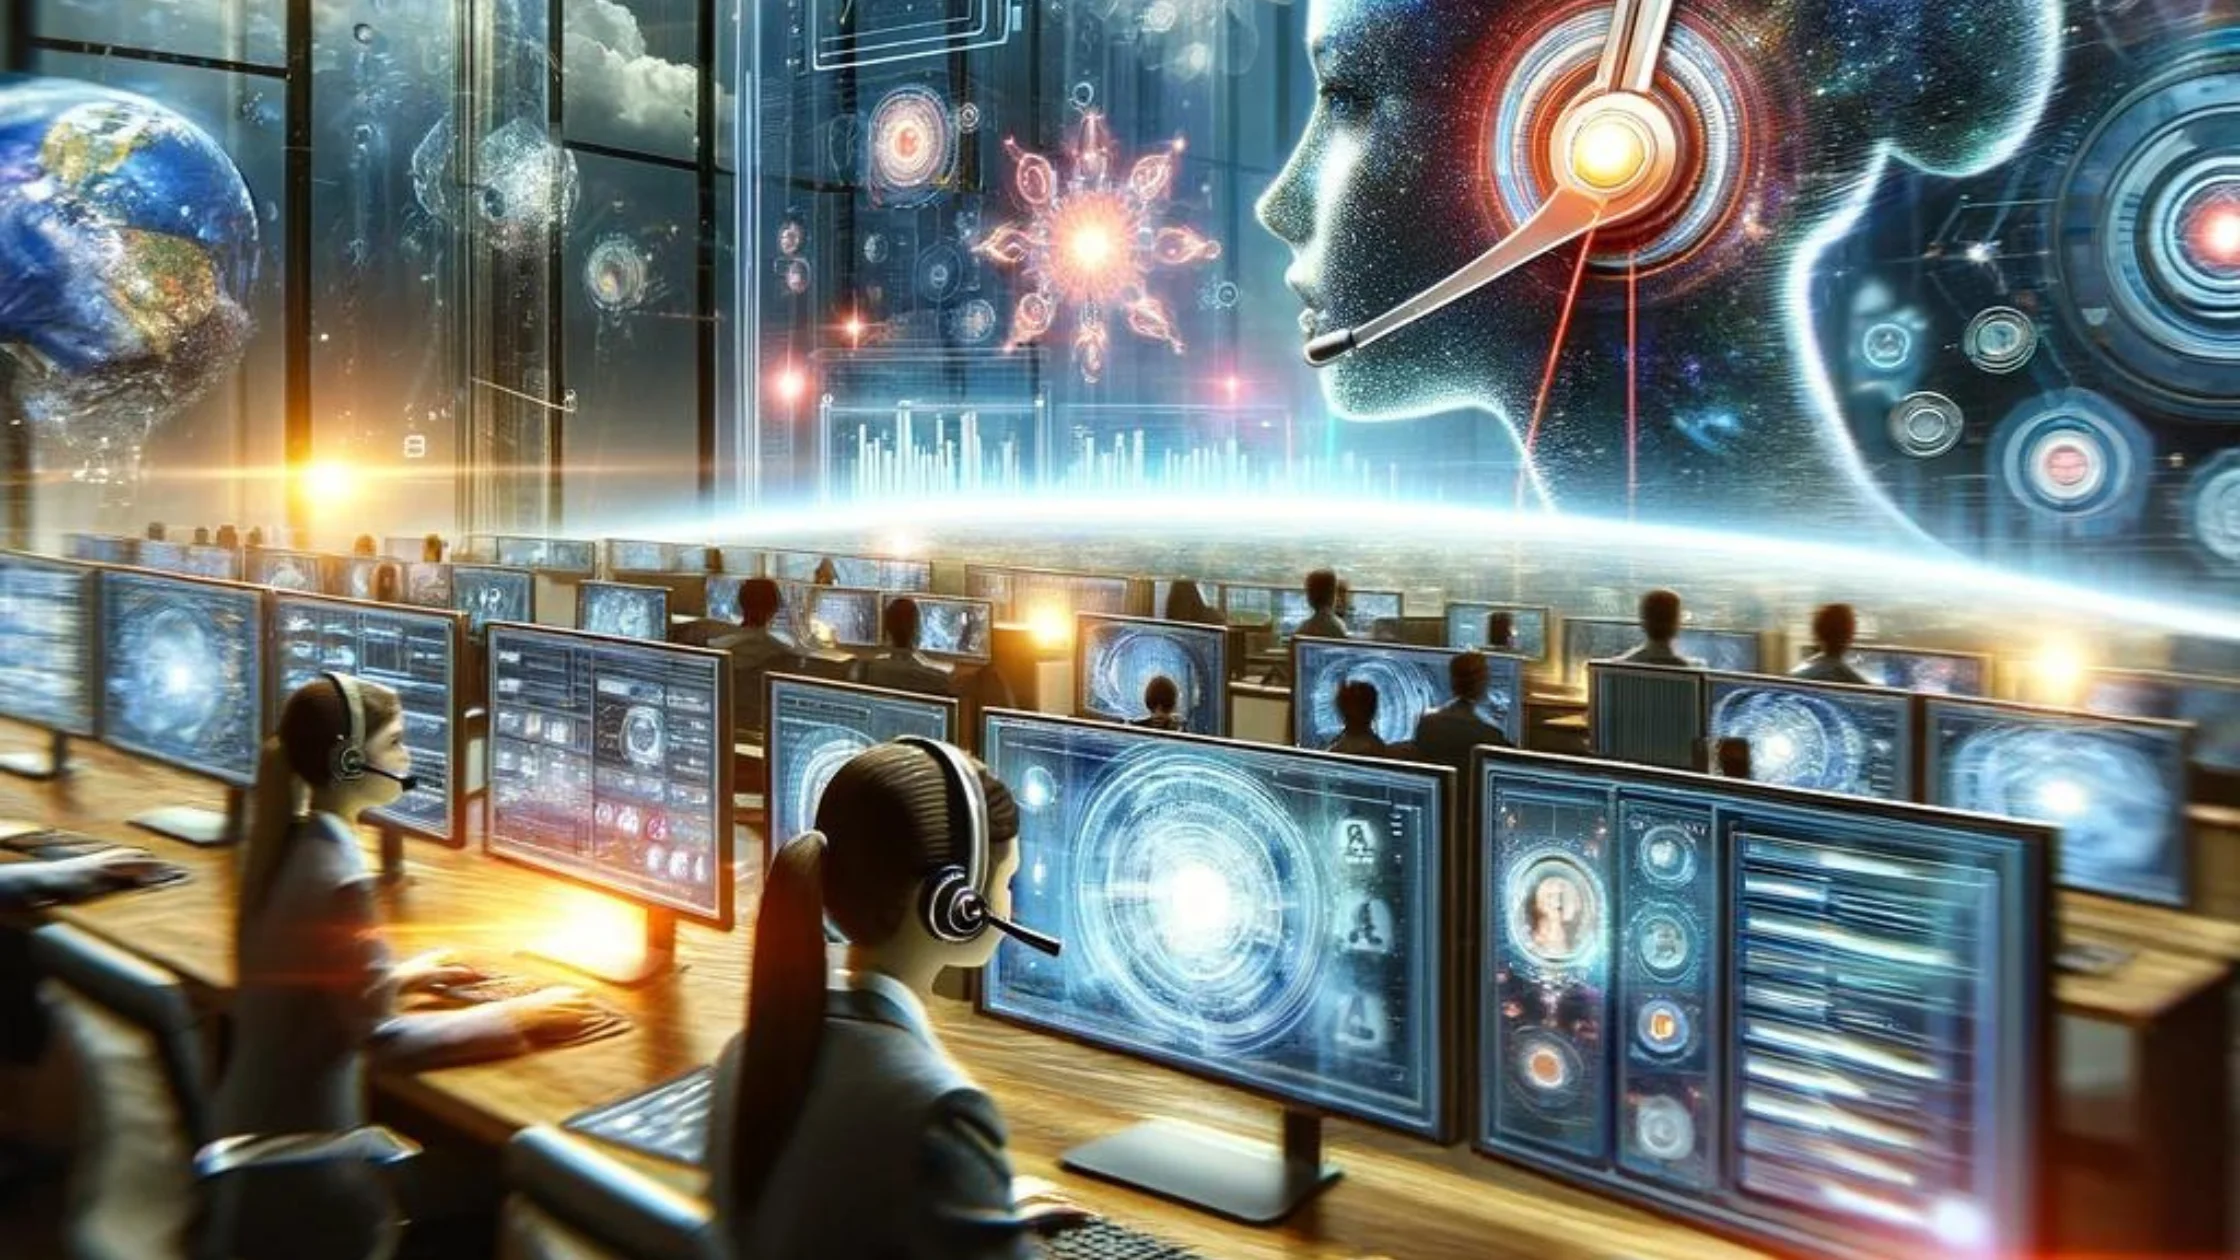 Image of the future of IVR and AI ChatGPT Bots running a business with people watching over the system